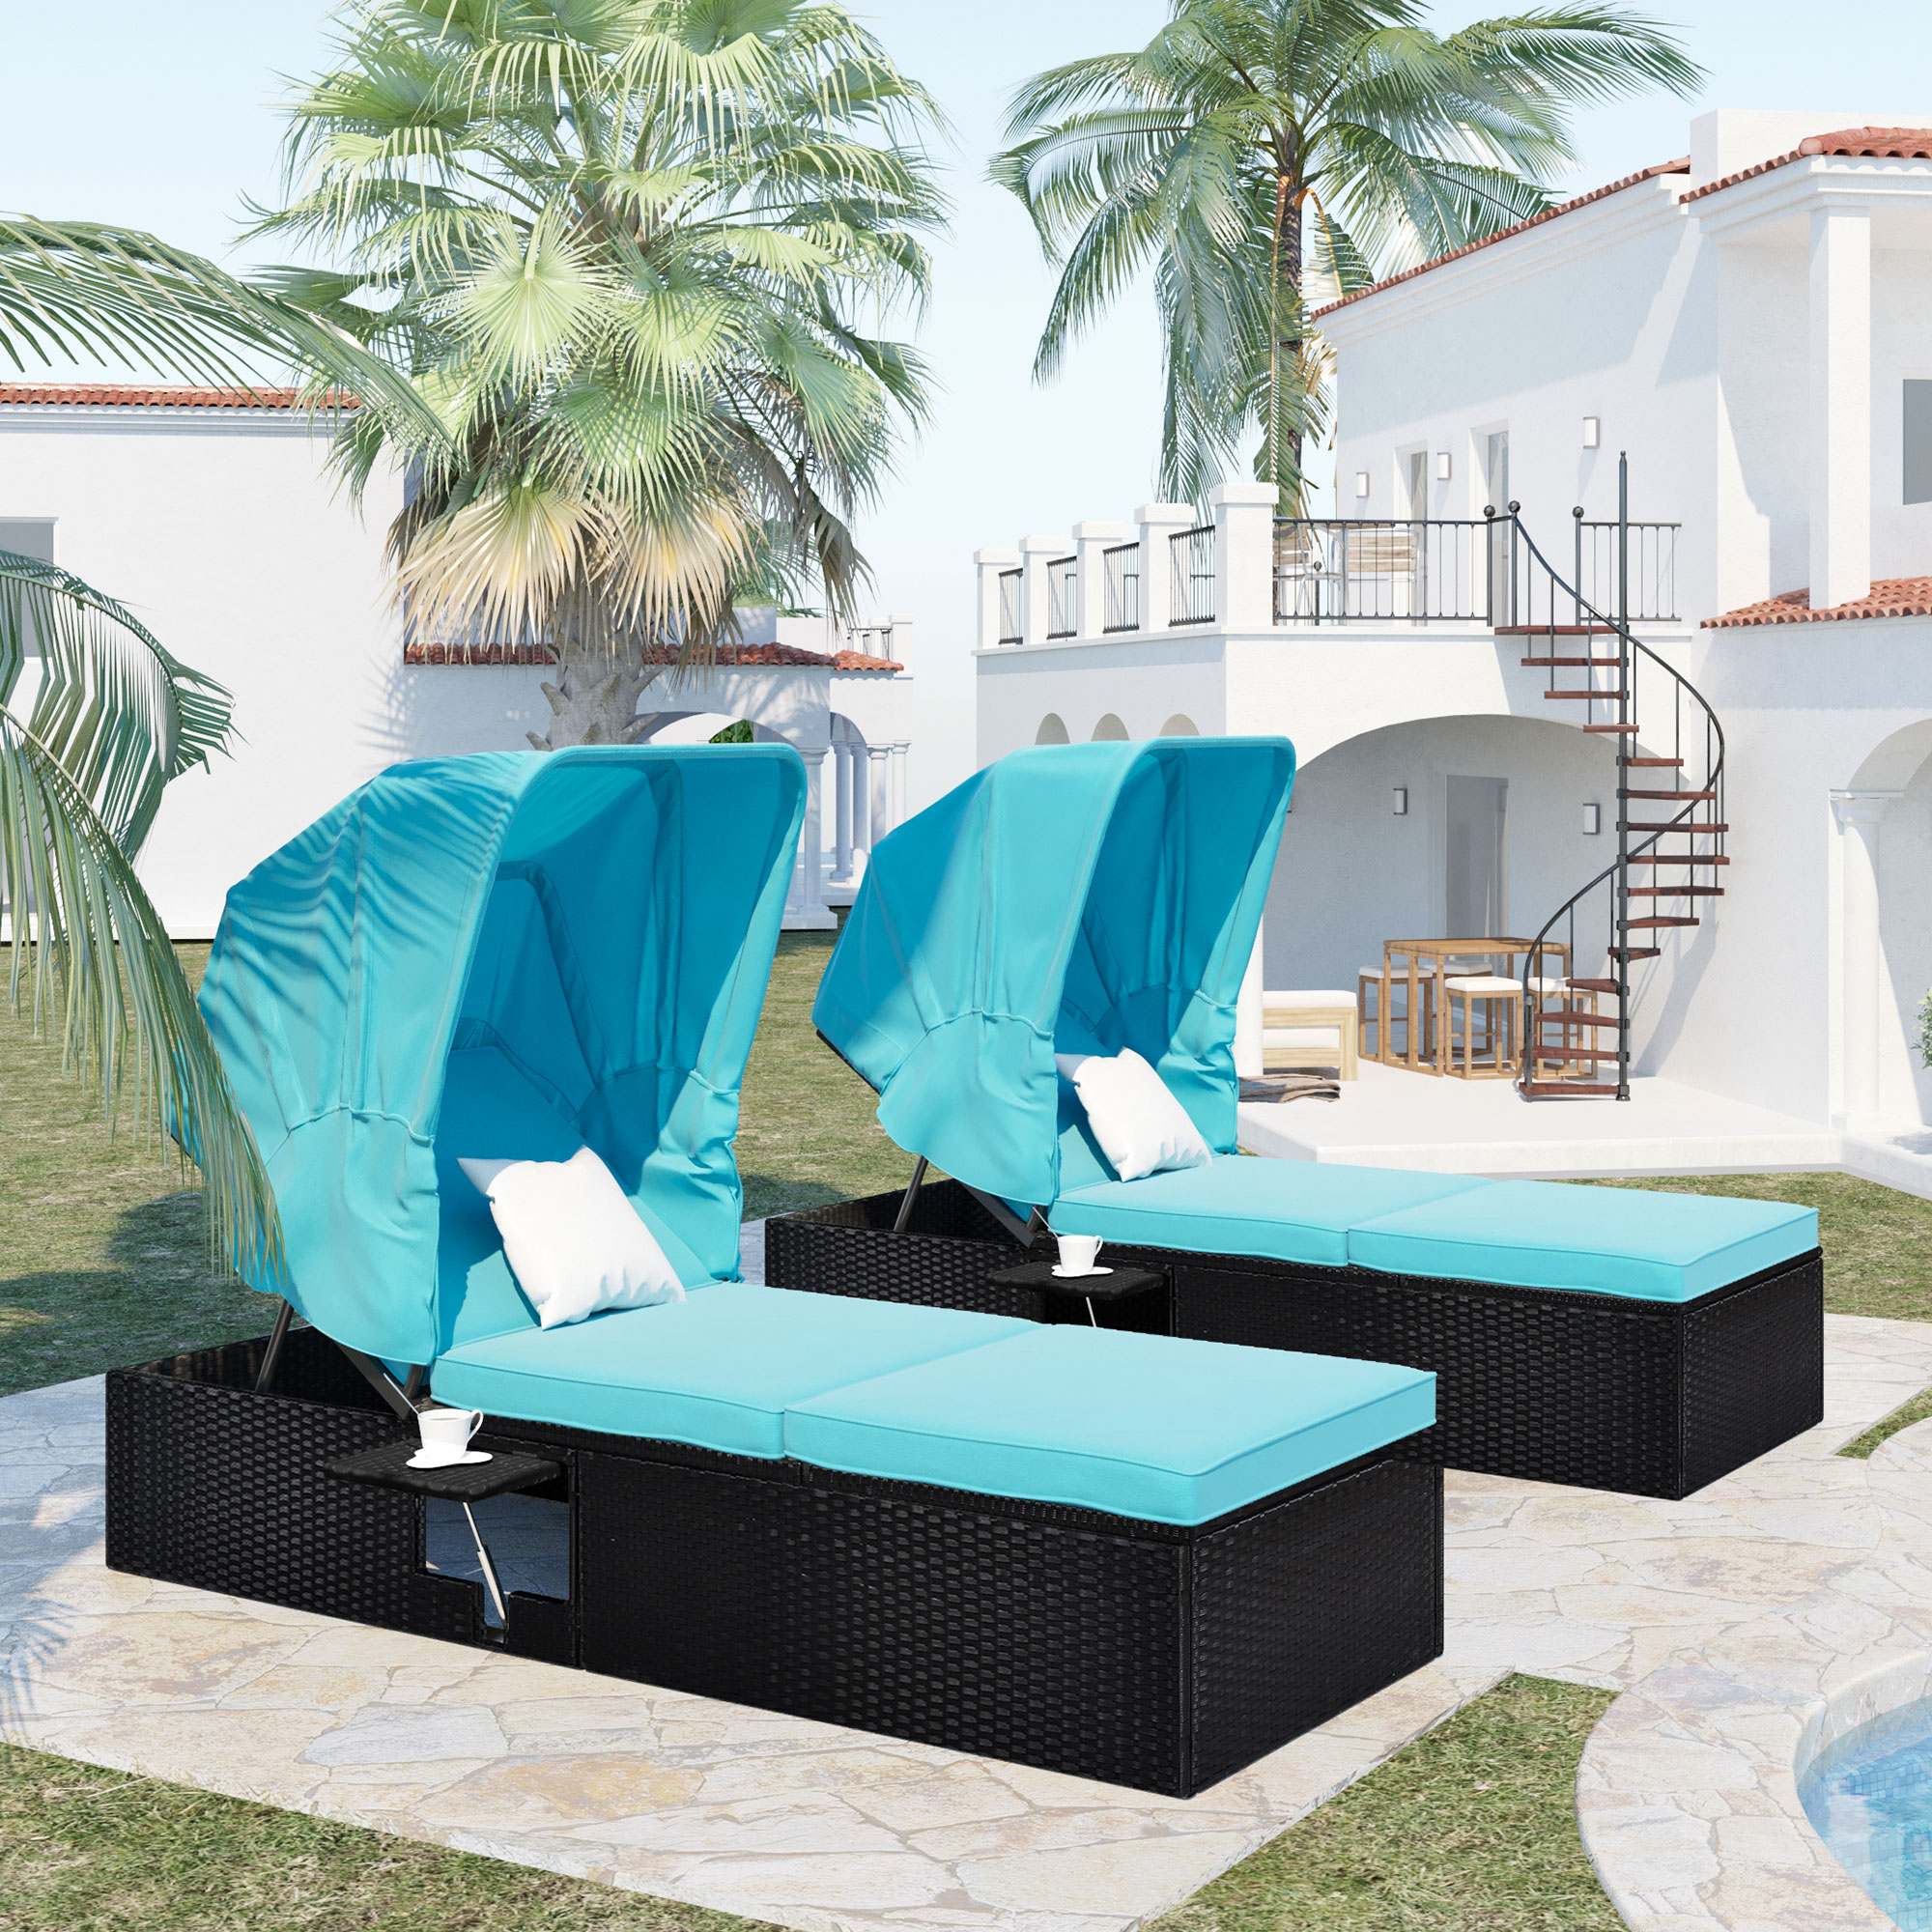 SYNGAR Patio Chaise Lounge Chairs Set of 2, Outdoor PE Wicker Reclining Lounge Chairs with Canopy and Cup Table, 5-Position Adjustable Sun Lounger with Removable Cushions, for Pool, Porch, Yard, D8280 - image 2 of 12